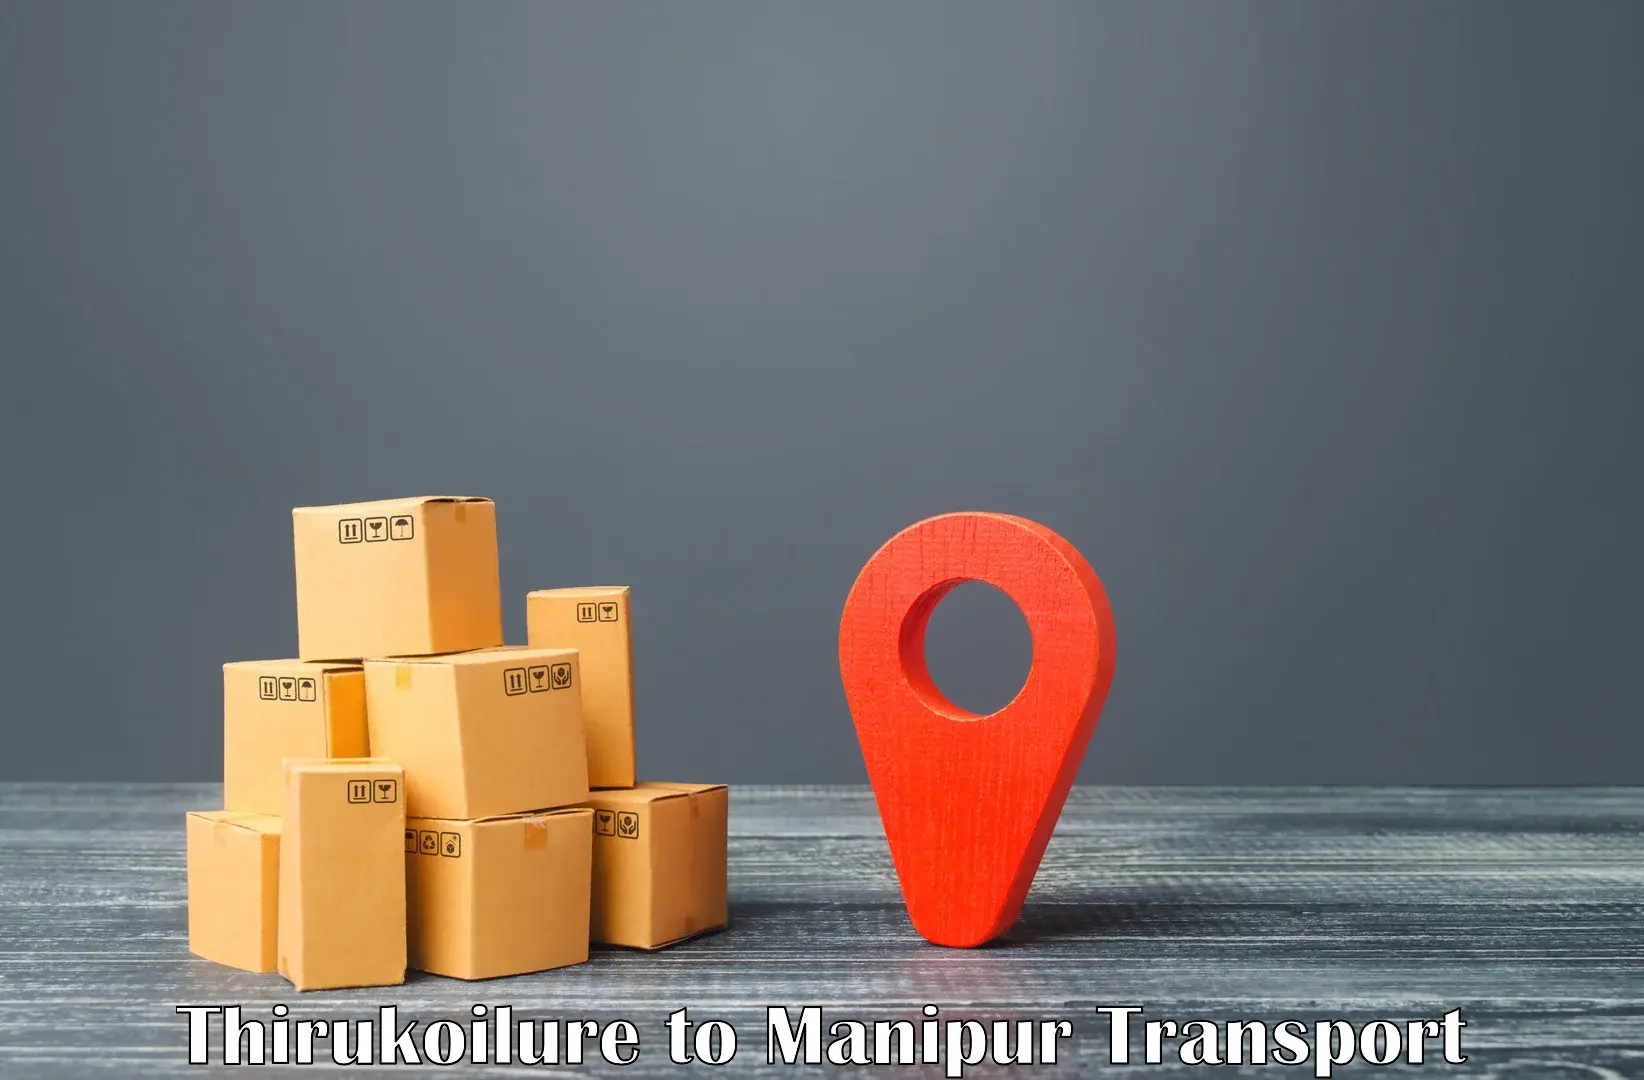 Nearby transport service in Thirukoilure to Manipur